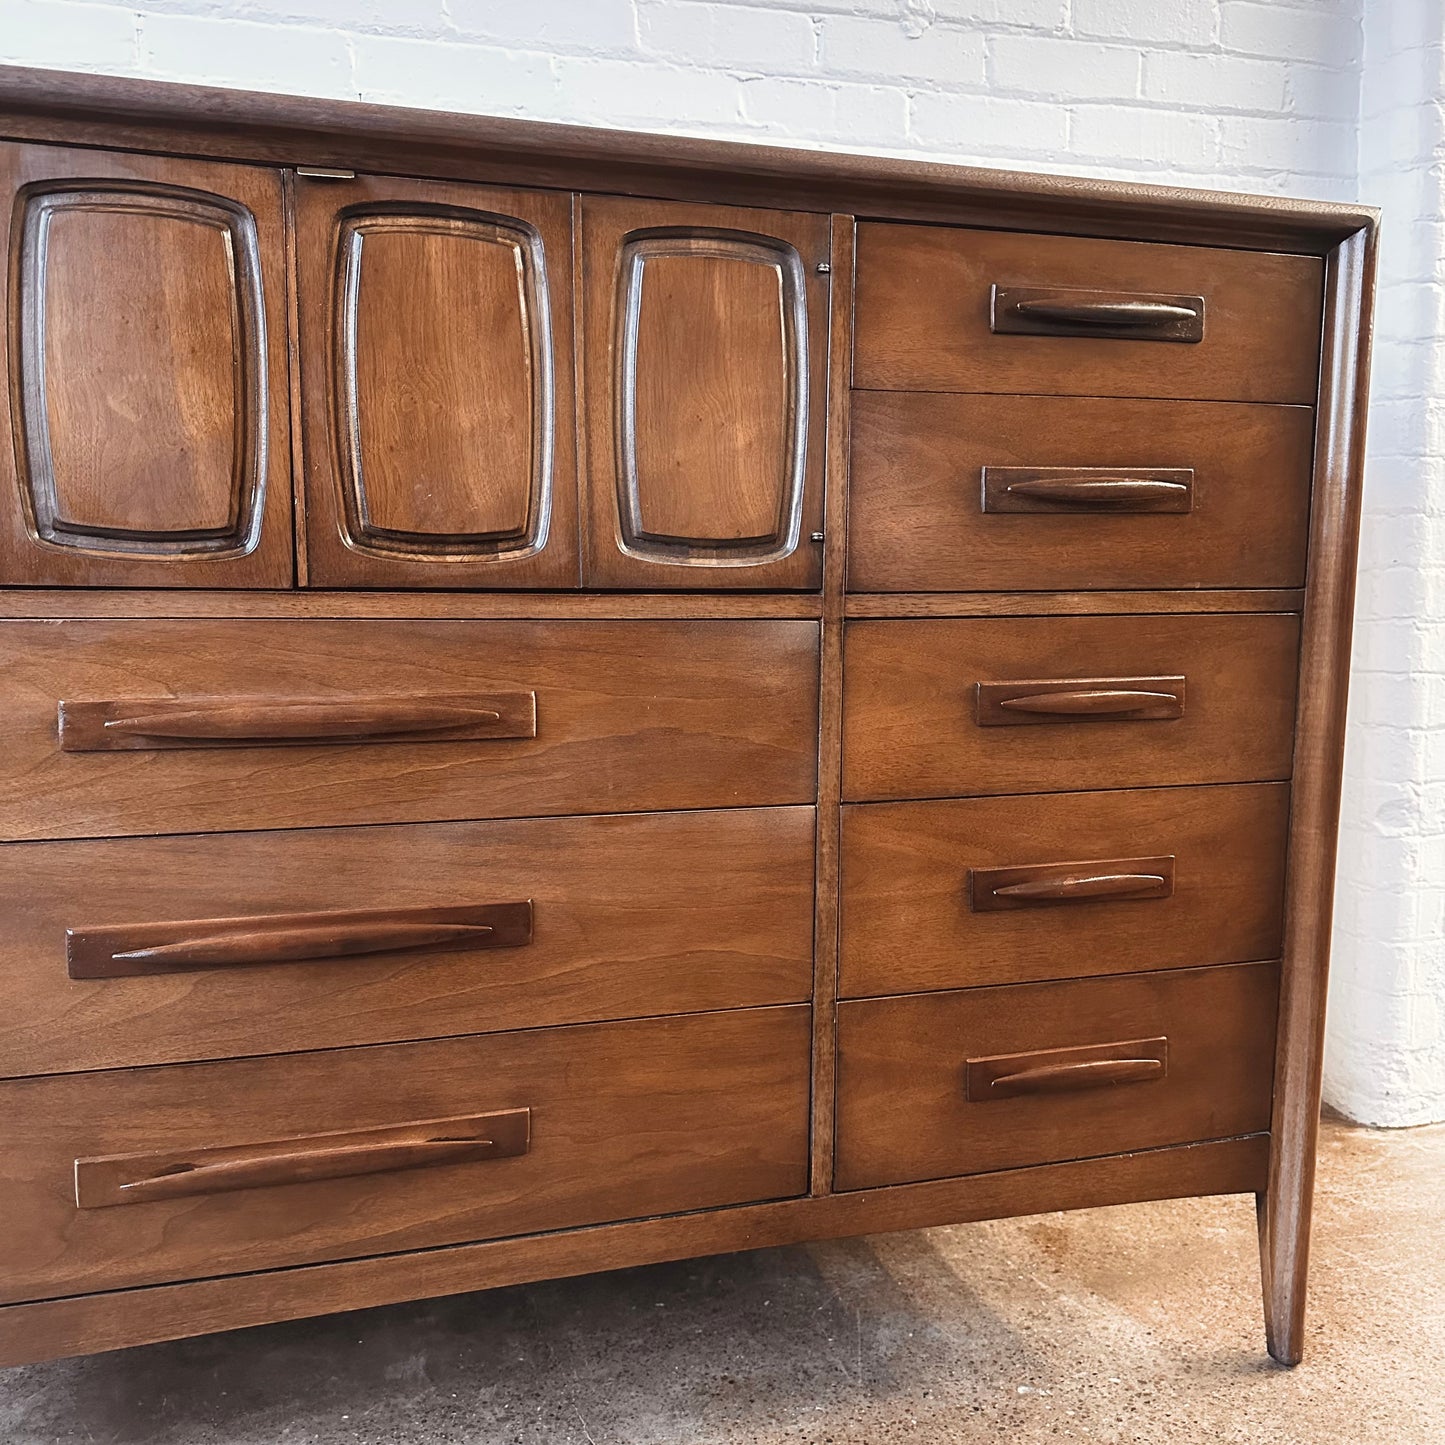 BROYHILL EMPHASIS GENTLEMEN’S CHEST OF DRAWERS